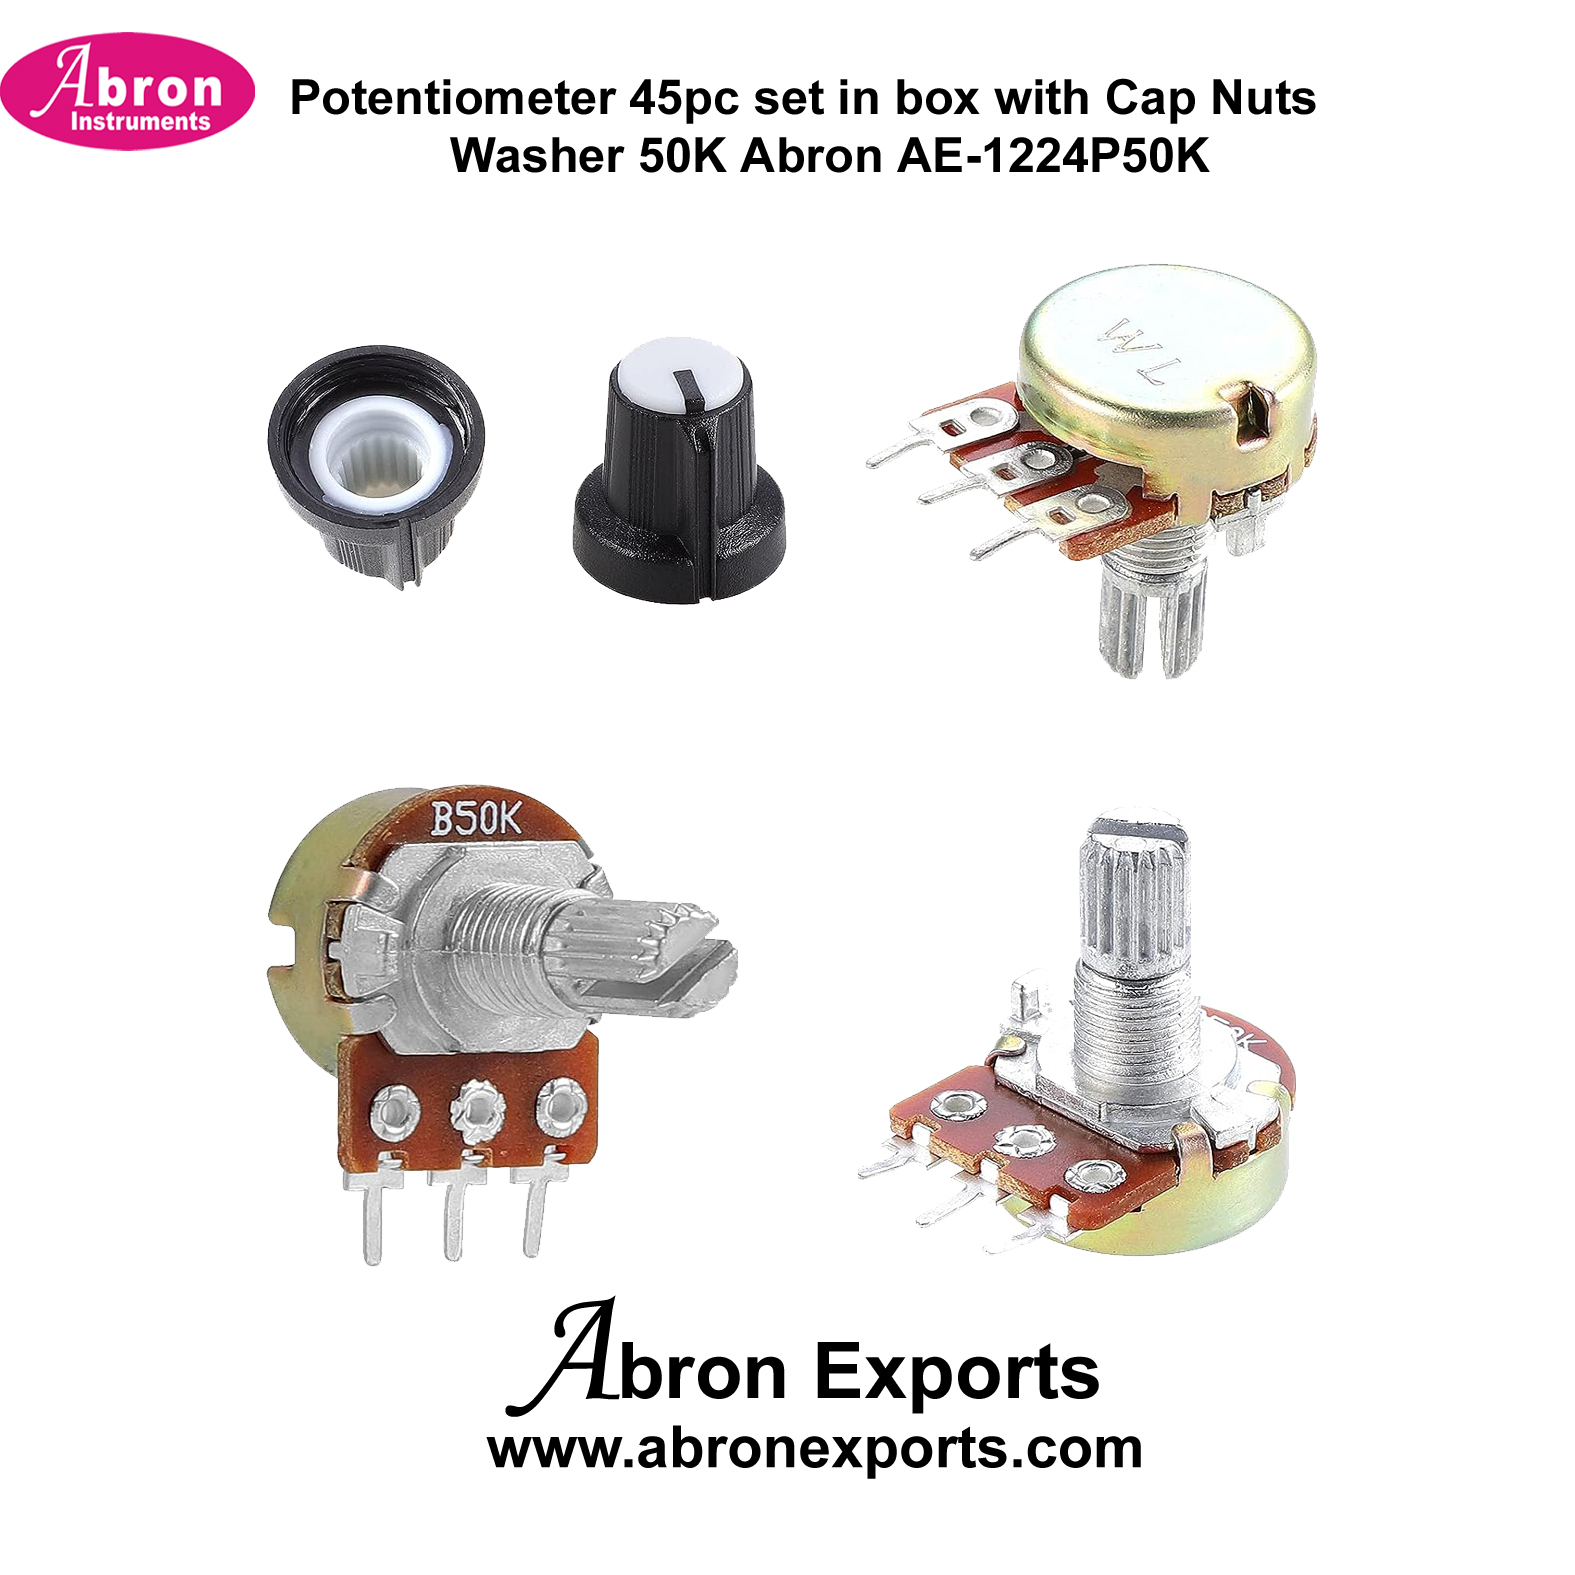 Potentiometer 45 pc set in box with Cap Nuts and Washer 50K Abron AE-1224P50K 